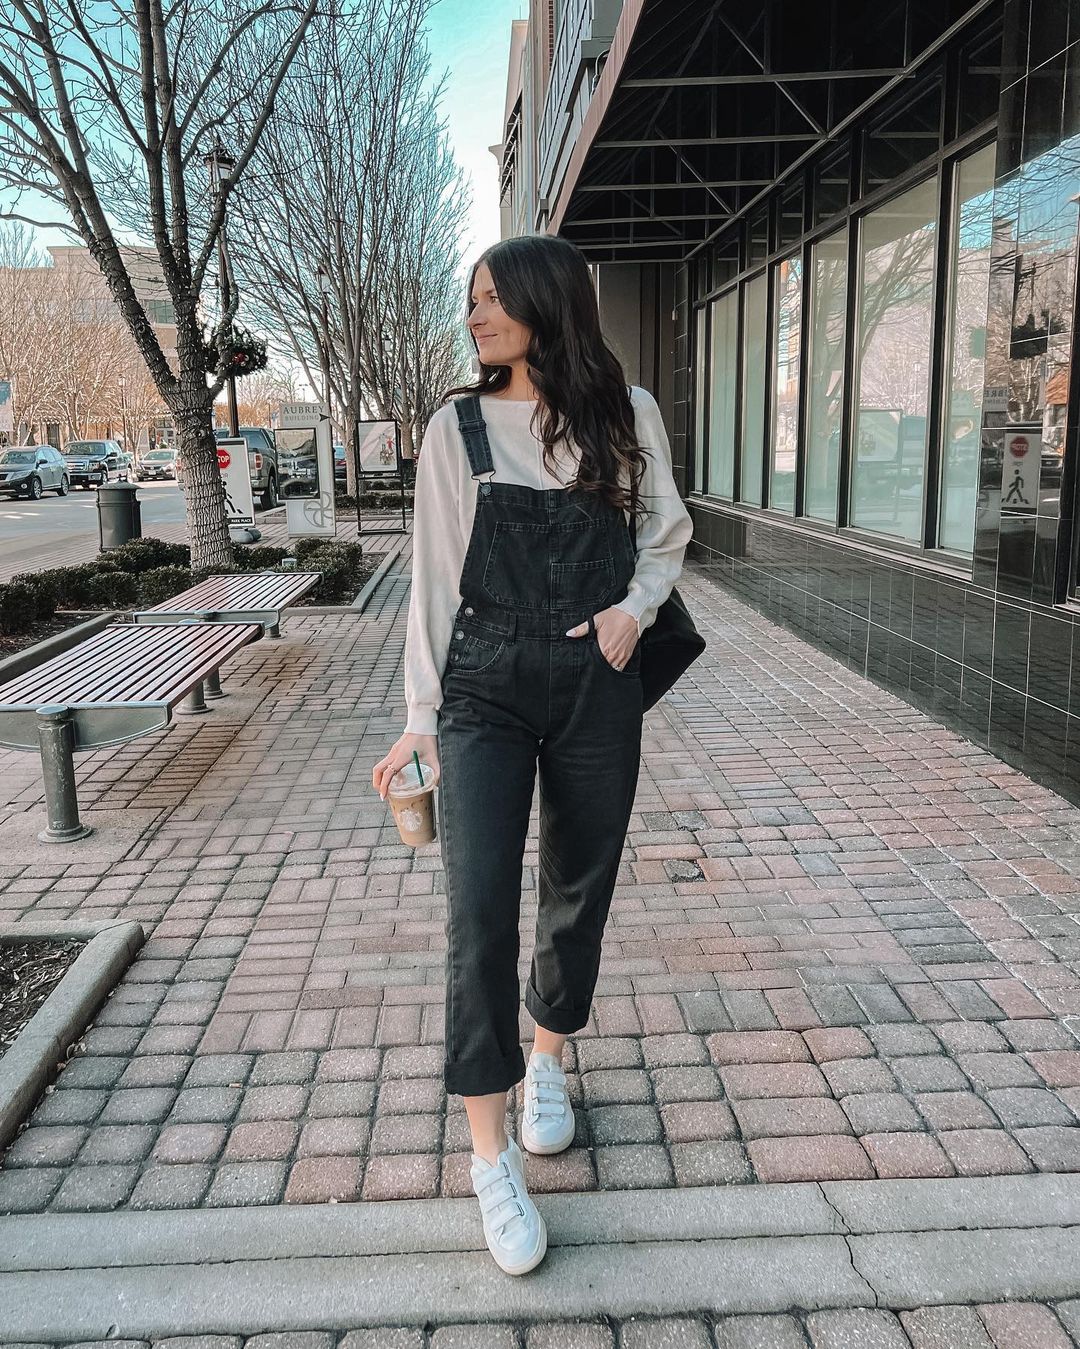 Dope Outfits for Girls - 28 Dope Fashion Ideas You Can Try